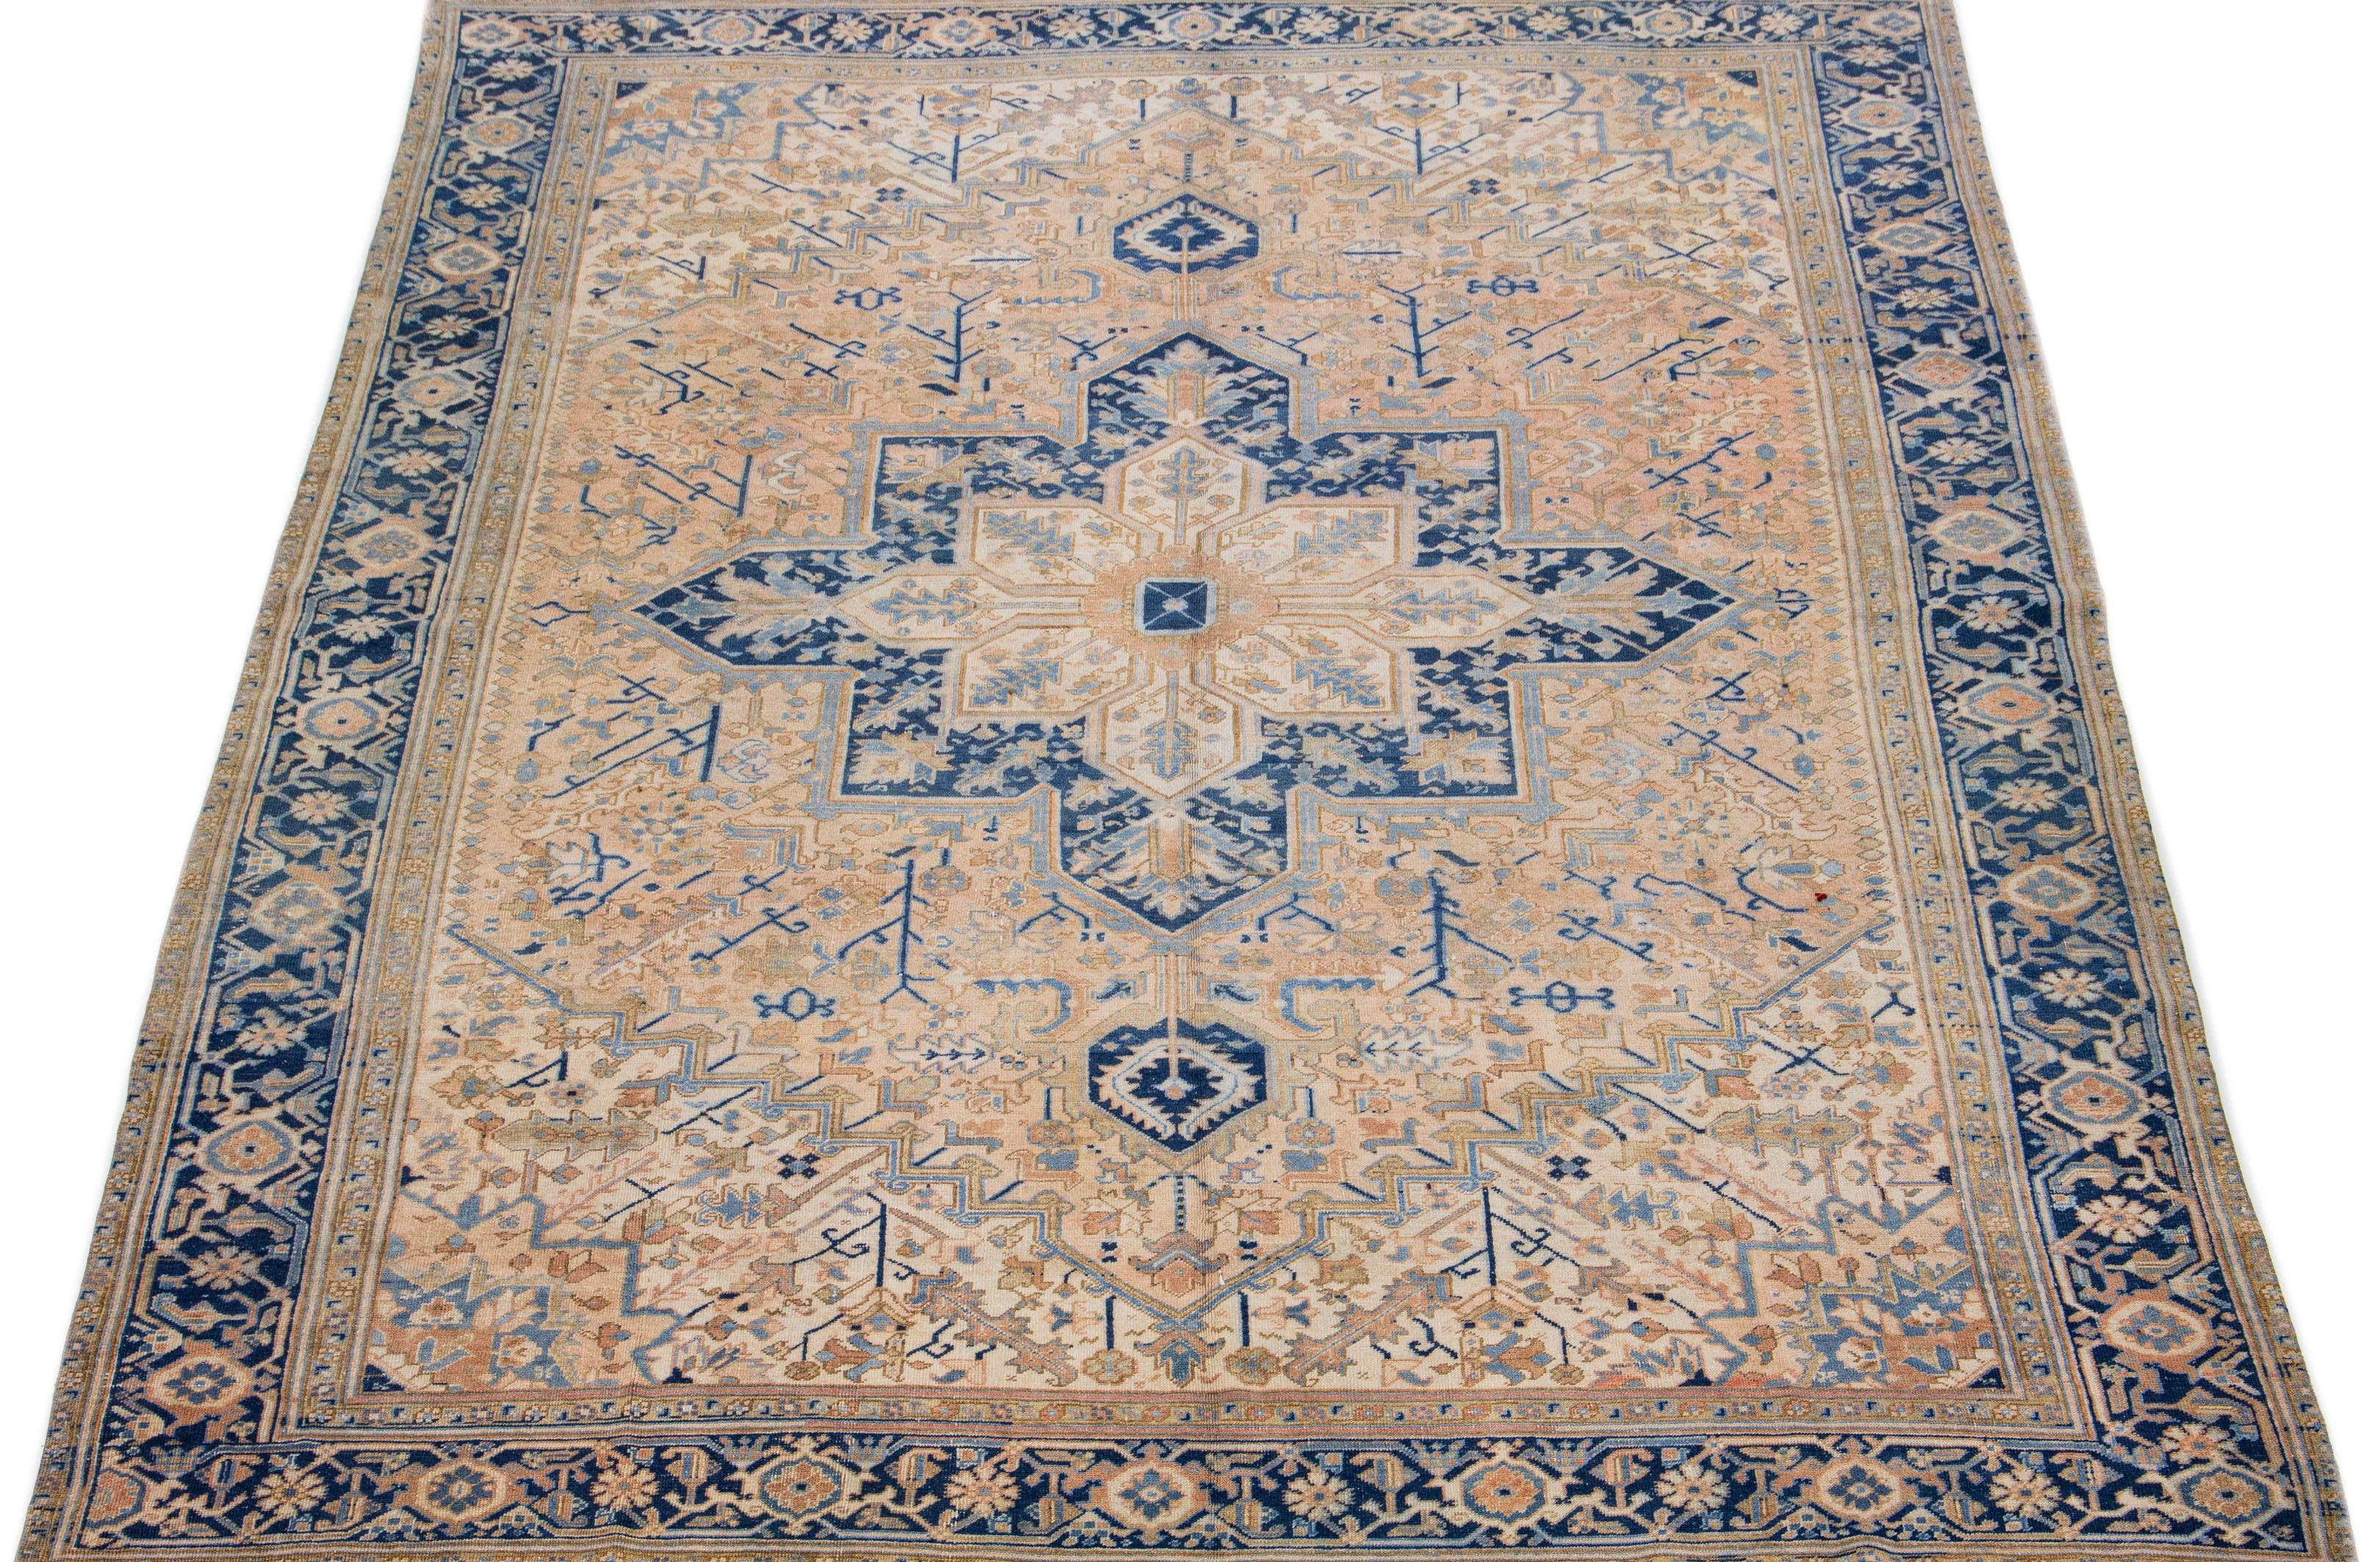 The vintage Heriz rug's hand knotted wool and remarkable medallion design exude Classic elegance and sophistication. The intricate floral motifs in shades of blue and brown, accentuating the soft peach field, lend an alluring touch, making it a